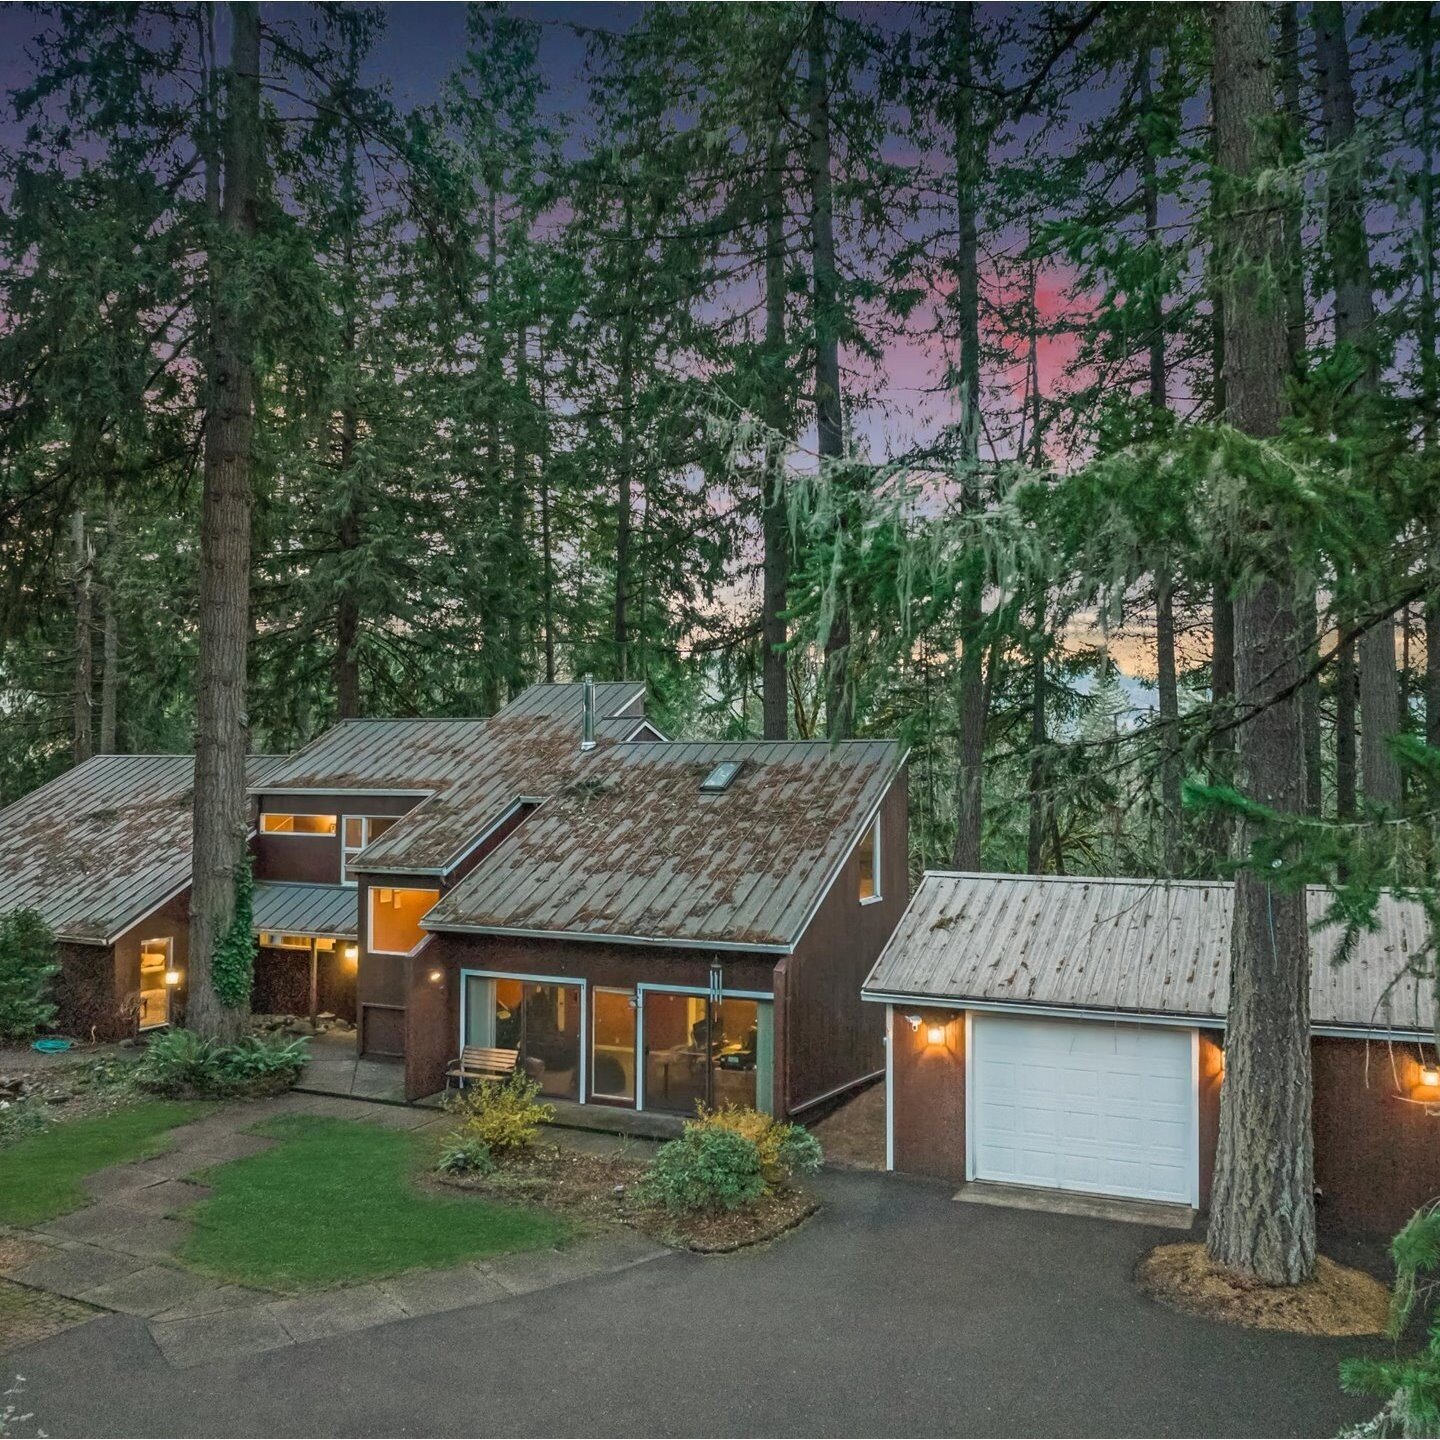 HOUSE CRUSH!!!!! Just outside of Estacada, with tons of Clackamas river frontage, this house is a total stunner. Make it your weekend getaway house or add your personal touches and enjoy nature year round, this house is a dream. Over 2 acres, plus a 